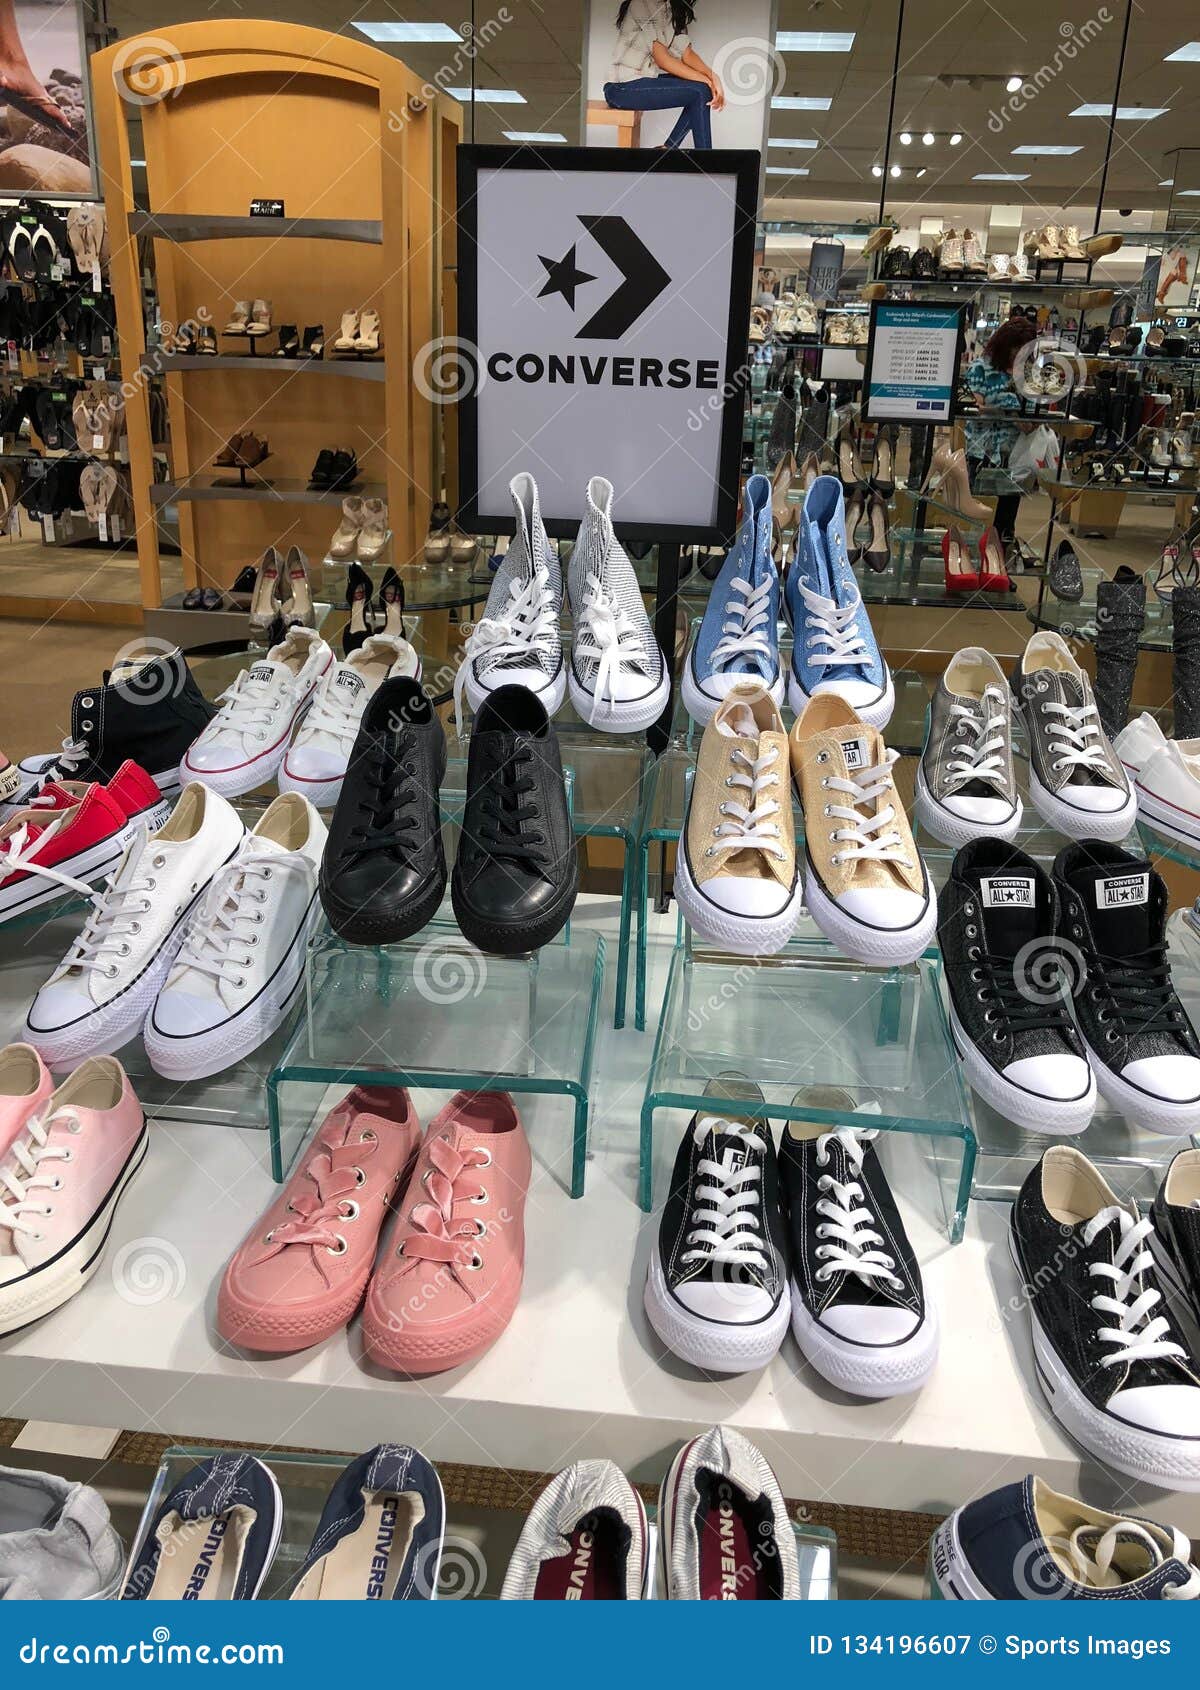 Learn about 88+ imagen converse department store - In.thptnganamst.edu.vn